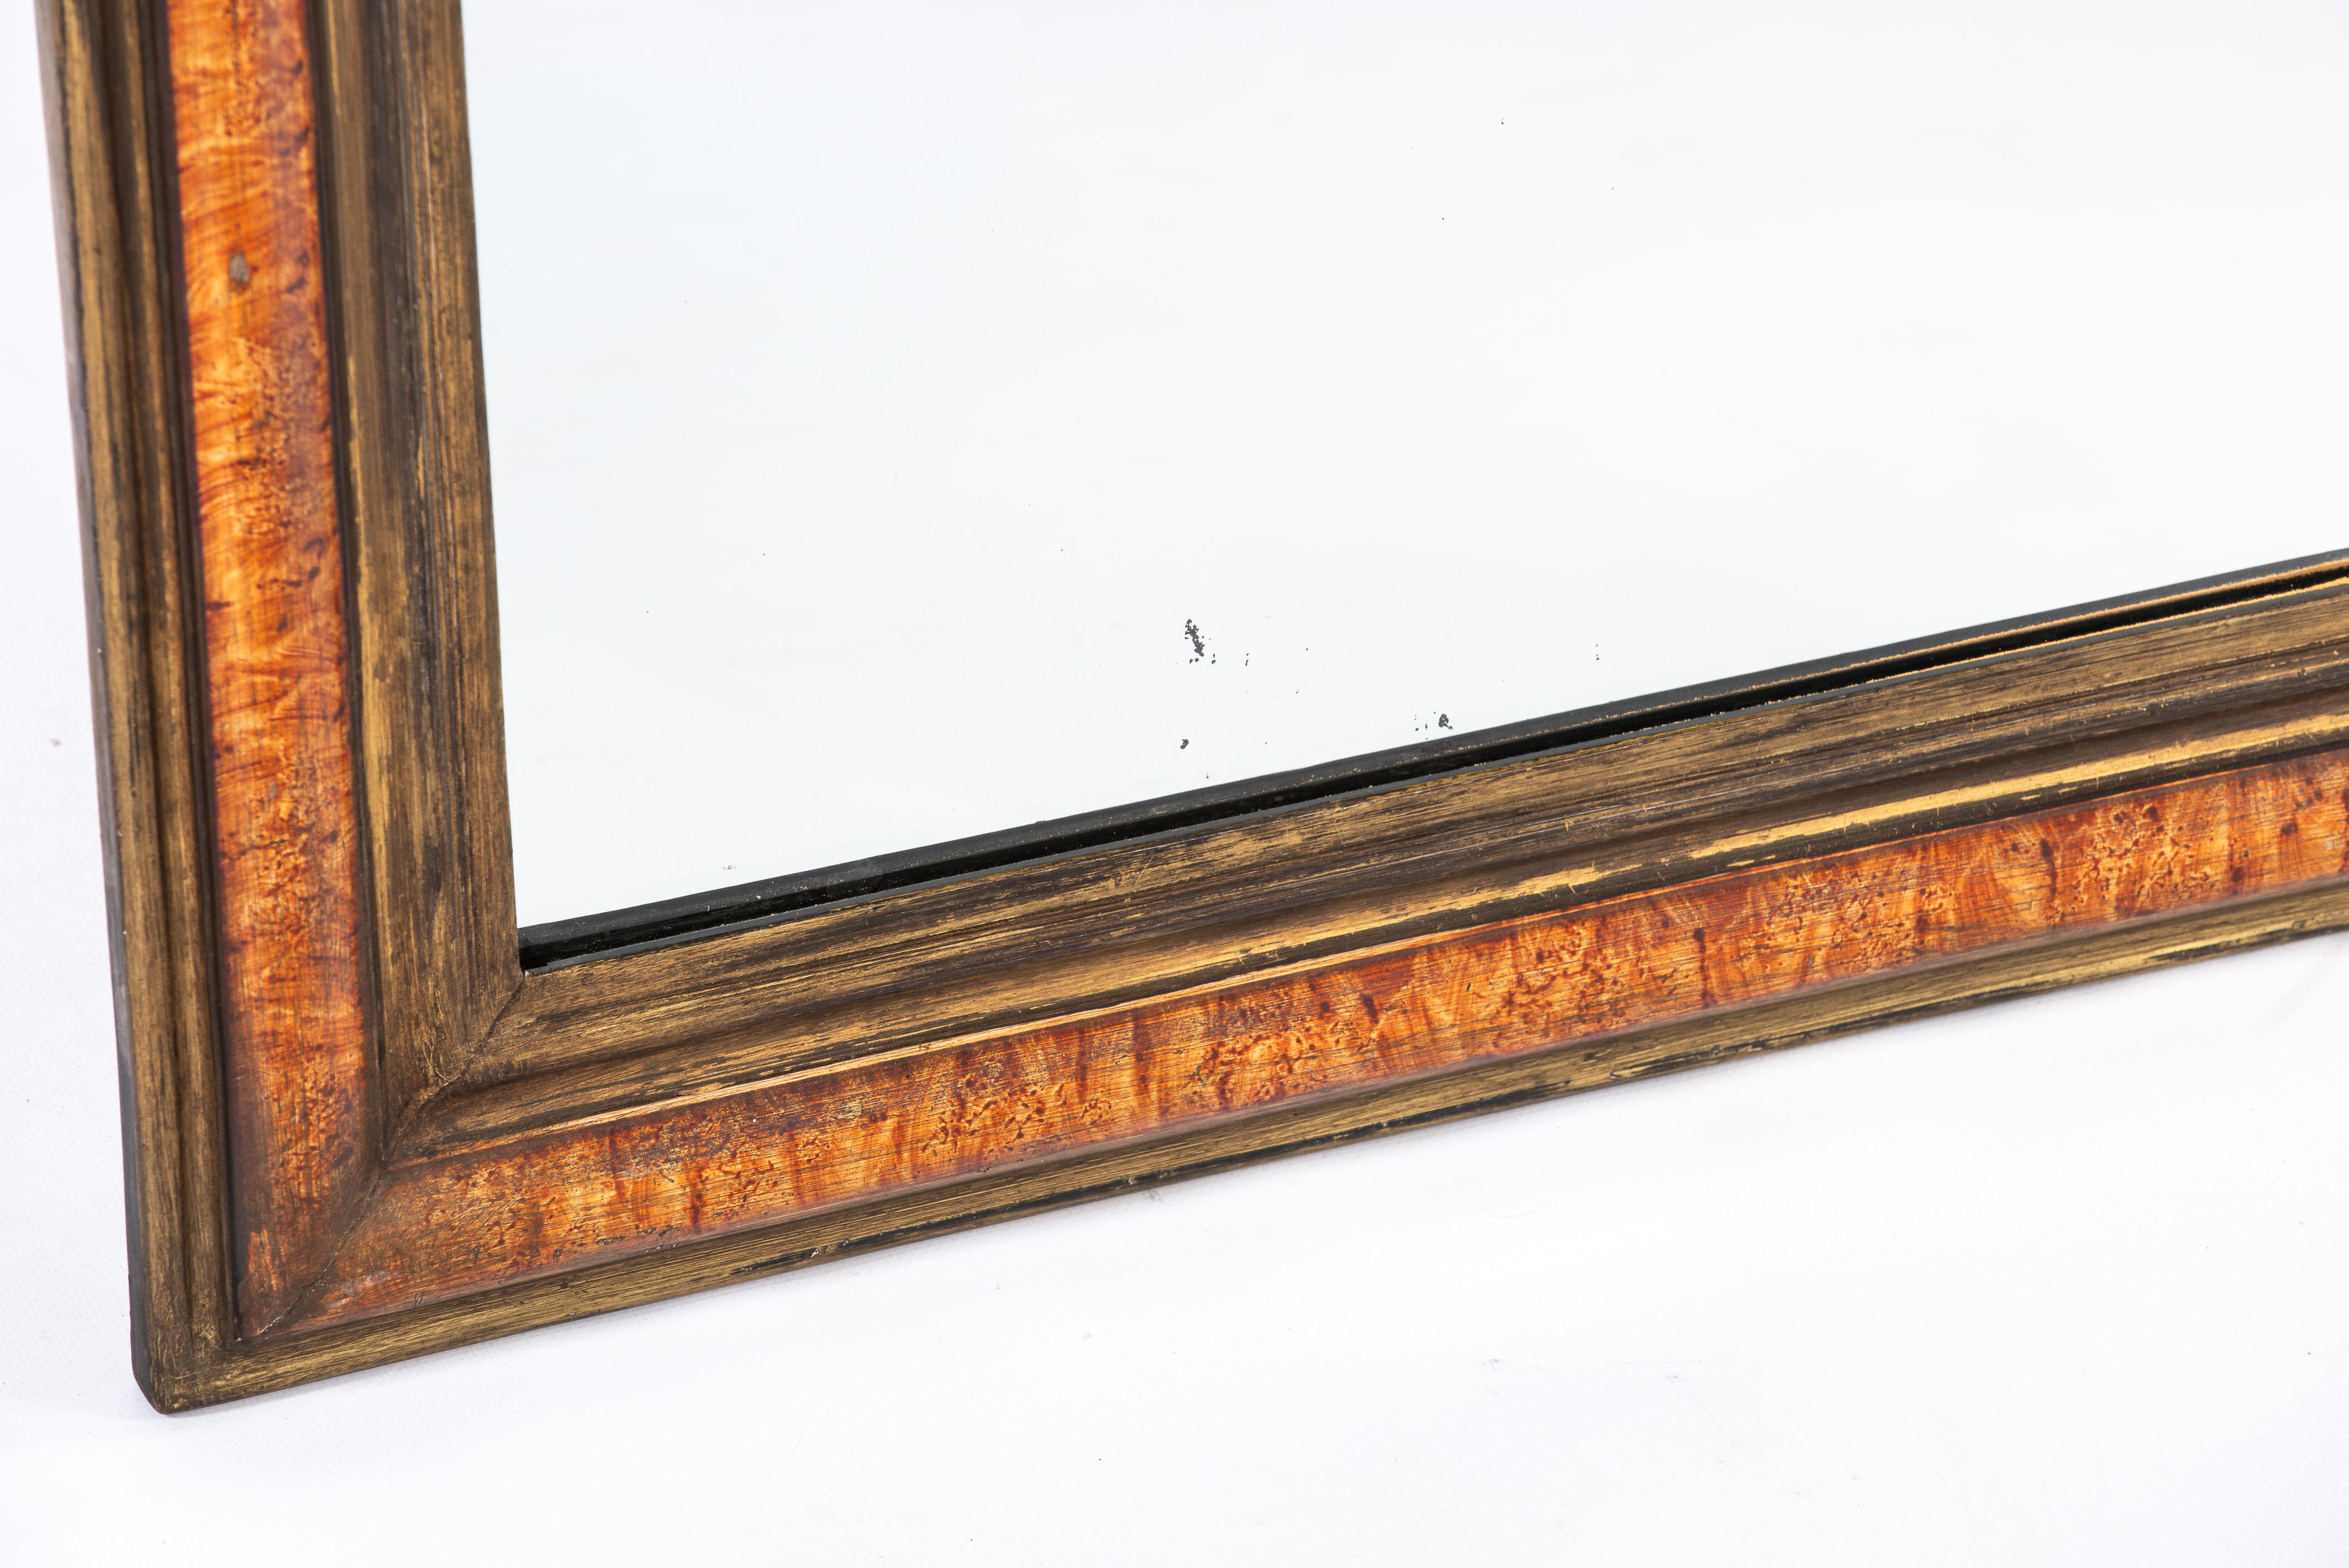 On offer here is a beautiful Louis Philippe mirror that was made in Northern France in the late 1800s. The mirror has a solid pine frame that was smoothened with gesso. The mirror frame is painted to resemble the exquisite wood species that is burl